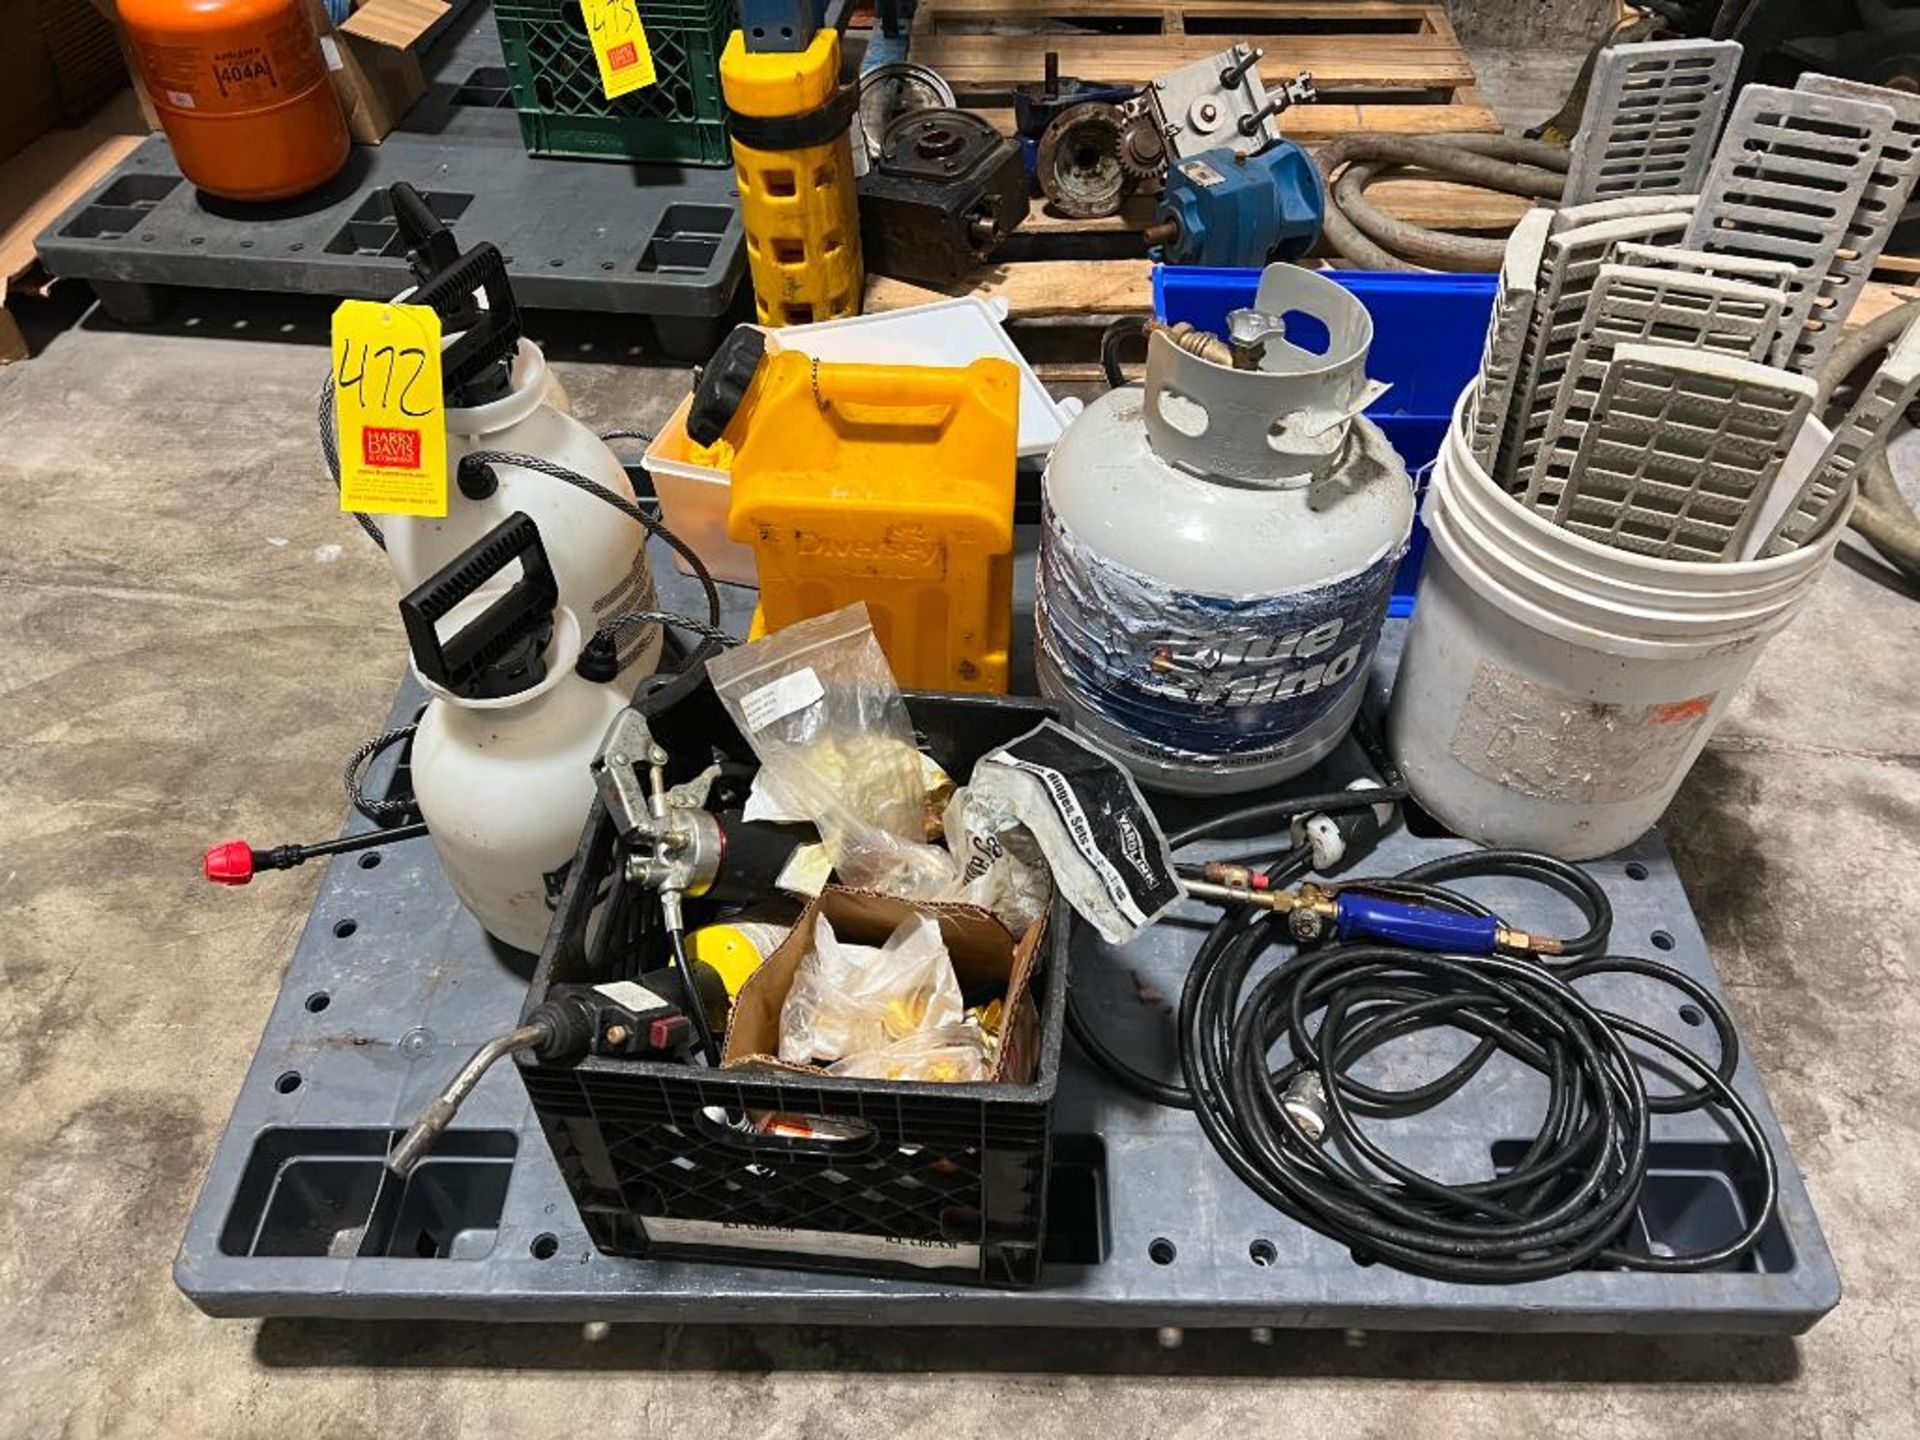 Assorted Sprayers, Fuel Containers, Drain Covers and Hydraulic Hoses - Rigging Fee: $100